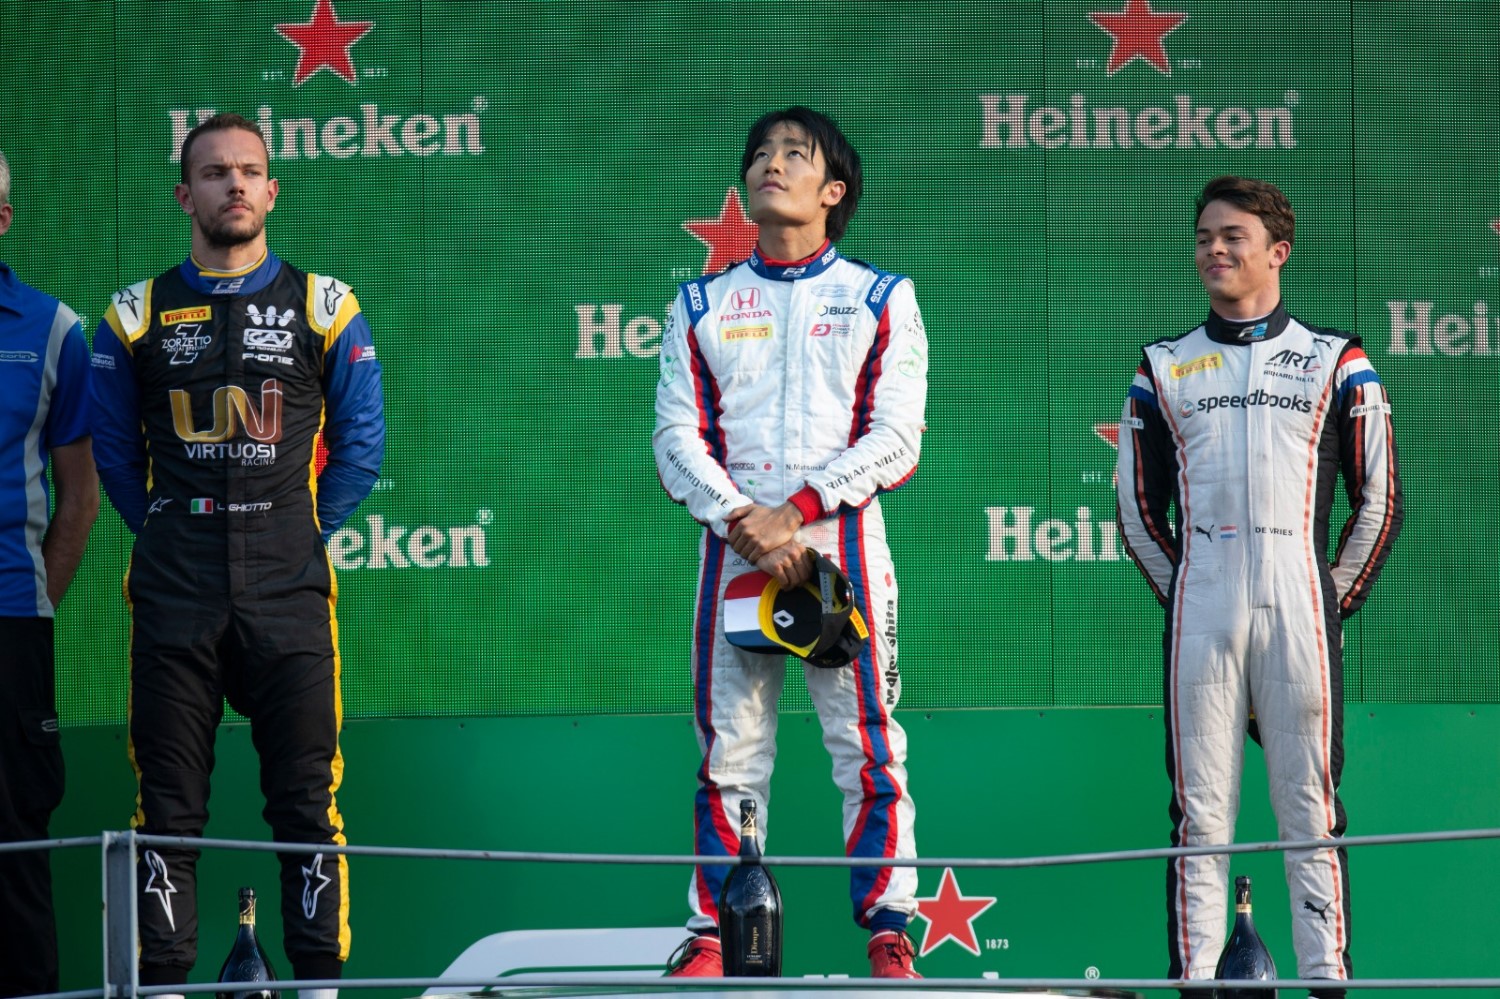 From left, and unhappy Ghiotto, a praying to the heavens Matsushita and de Vries